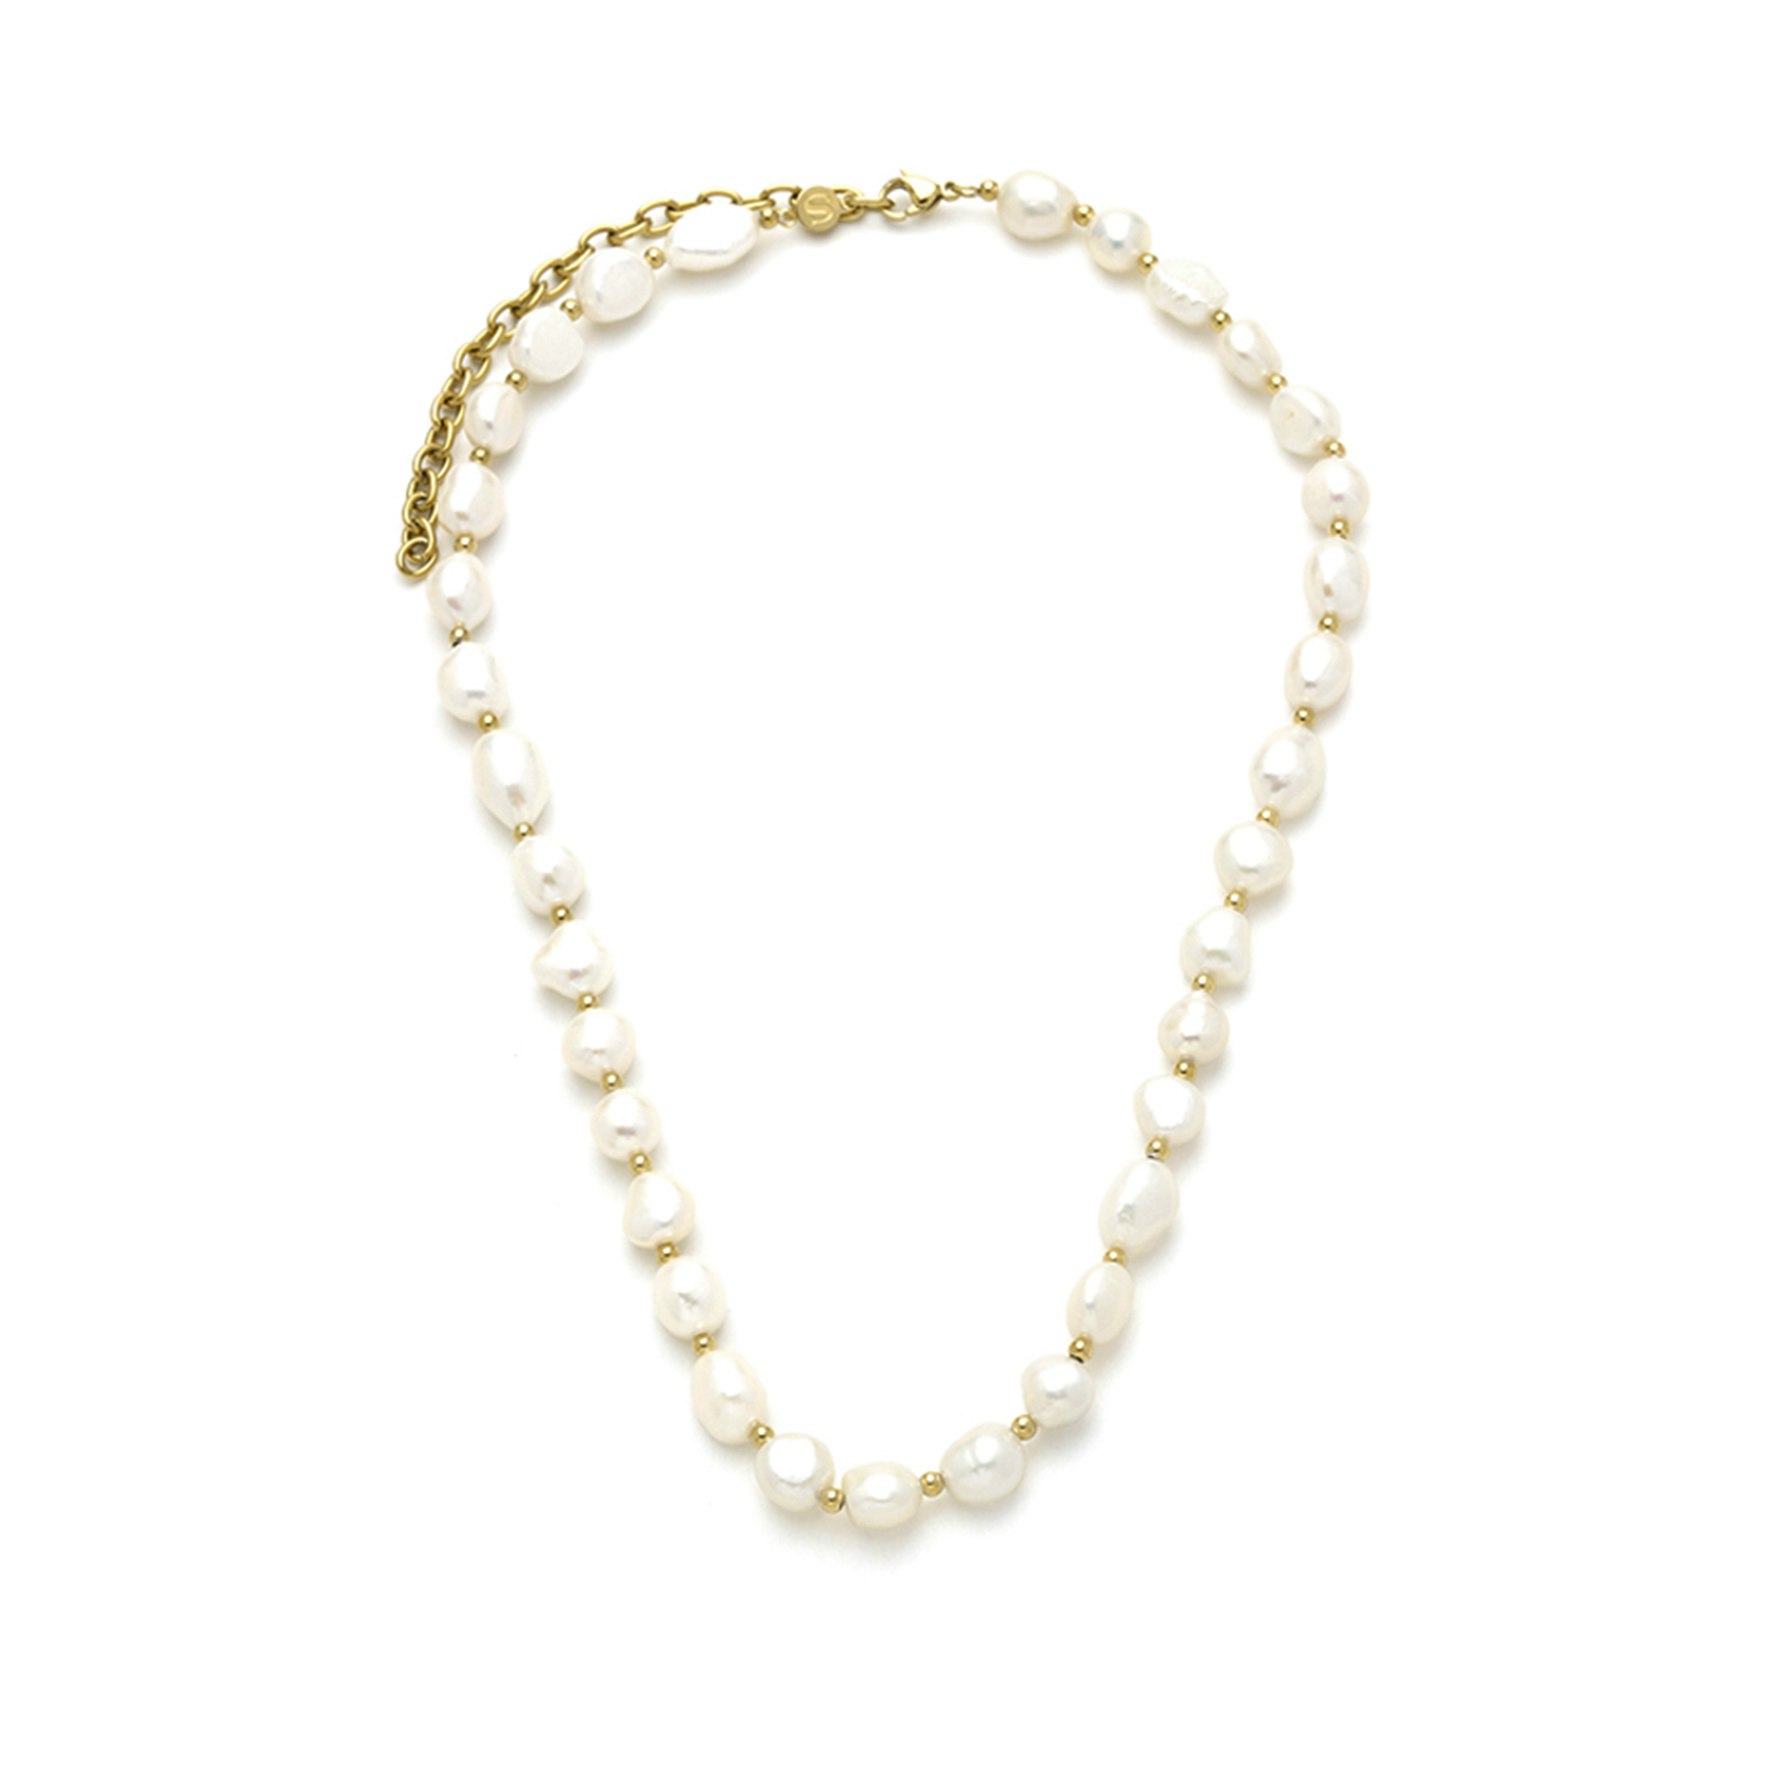 Erika Pearls Necklace from Sistie 2nd in Goldplated Stainless steel